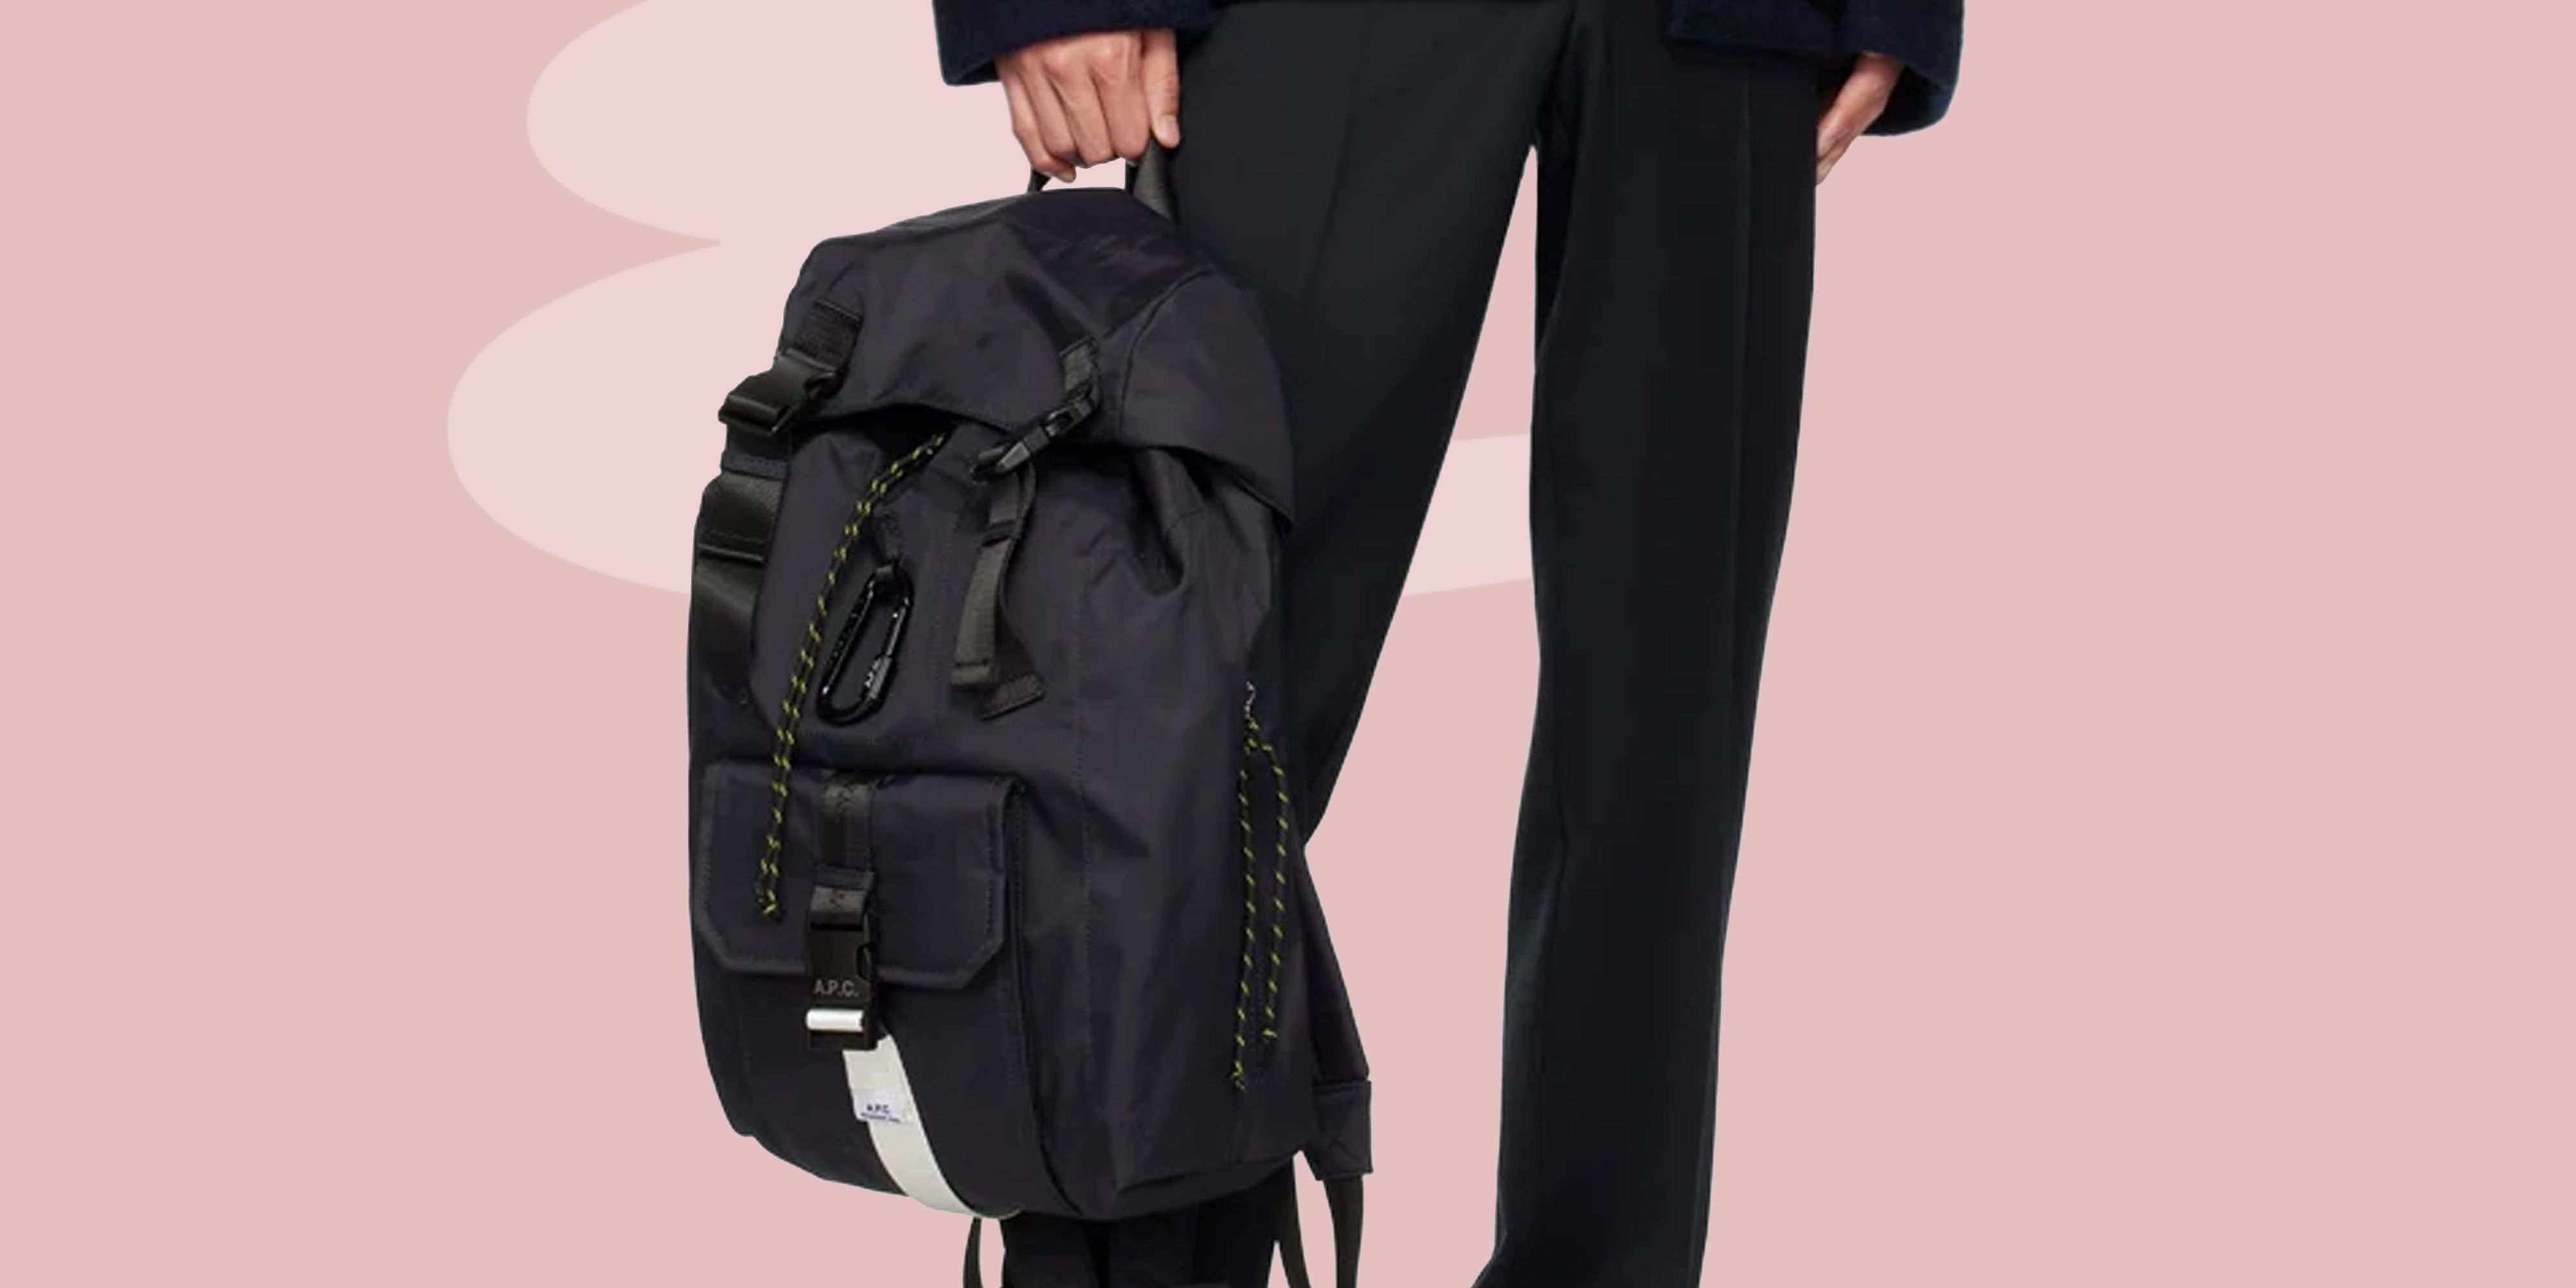 Grown-up backpacks to wear all summer long